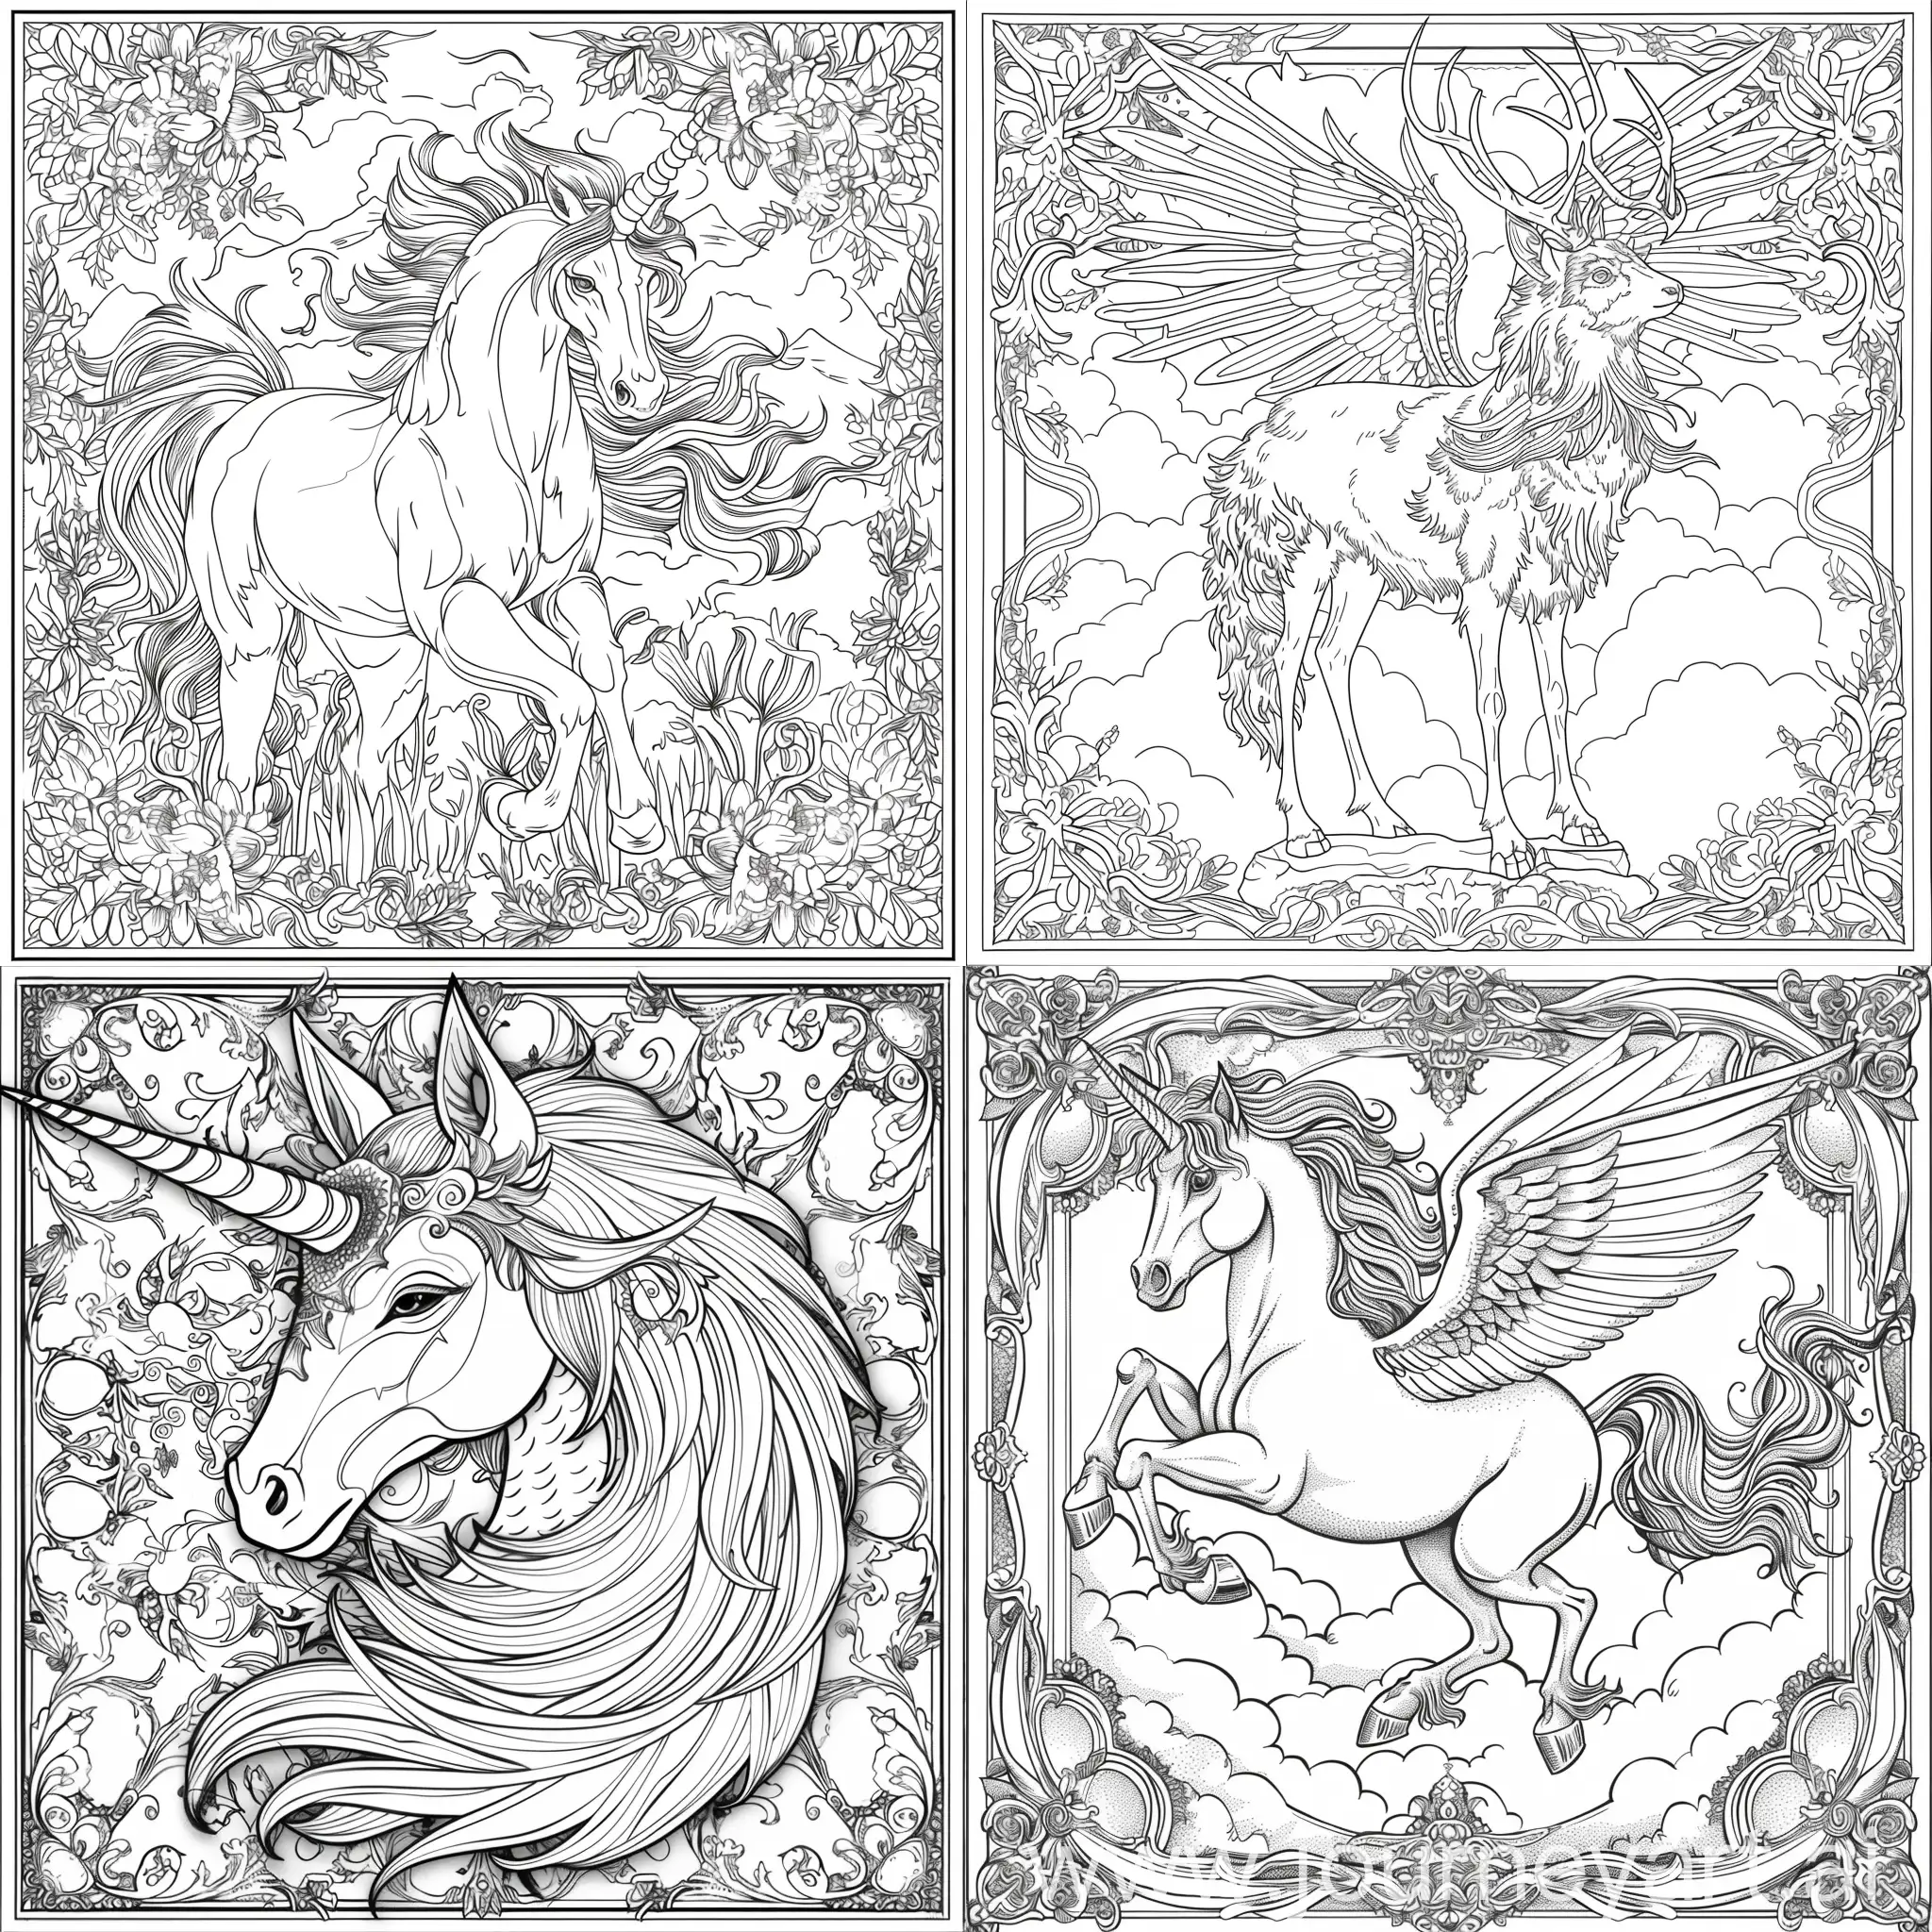 80 8.5 by 11. inch page coloring book pages with mistical chreatures